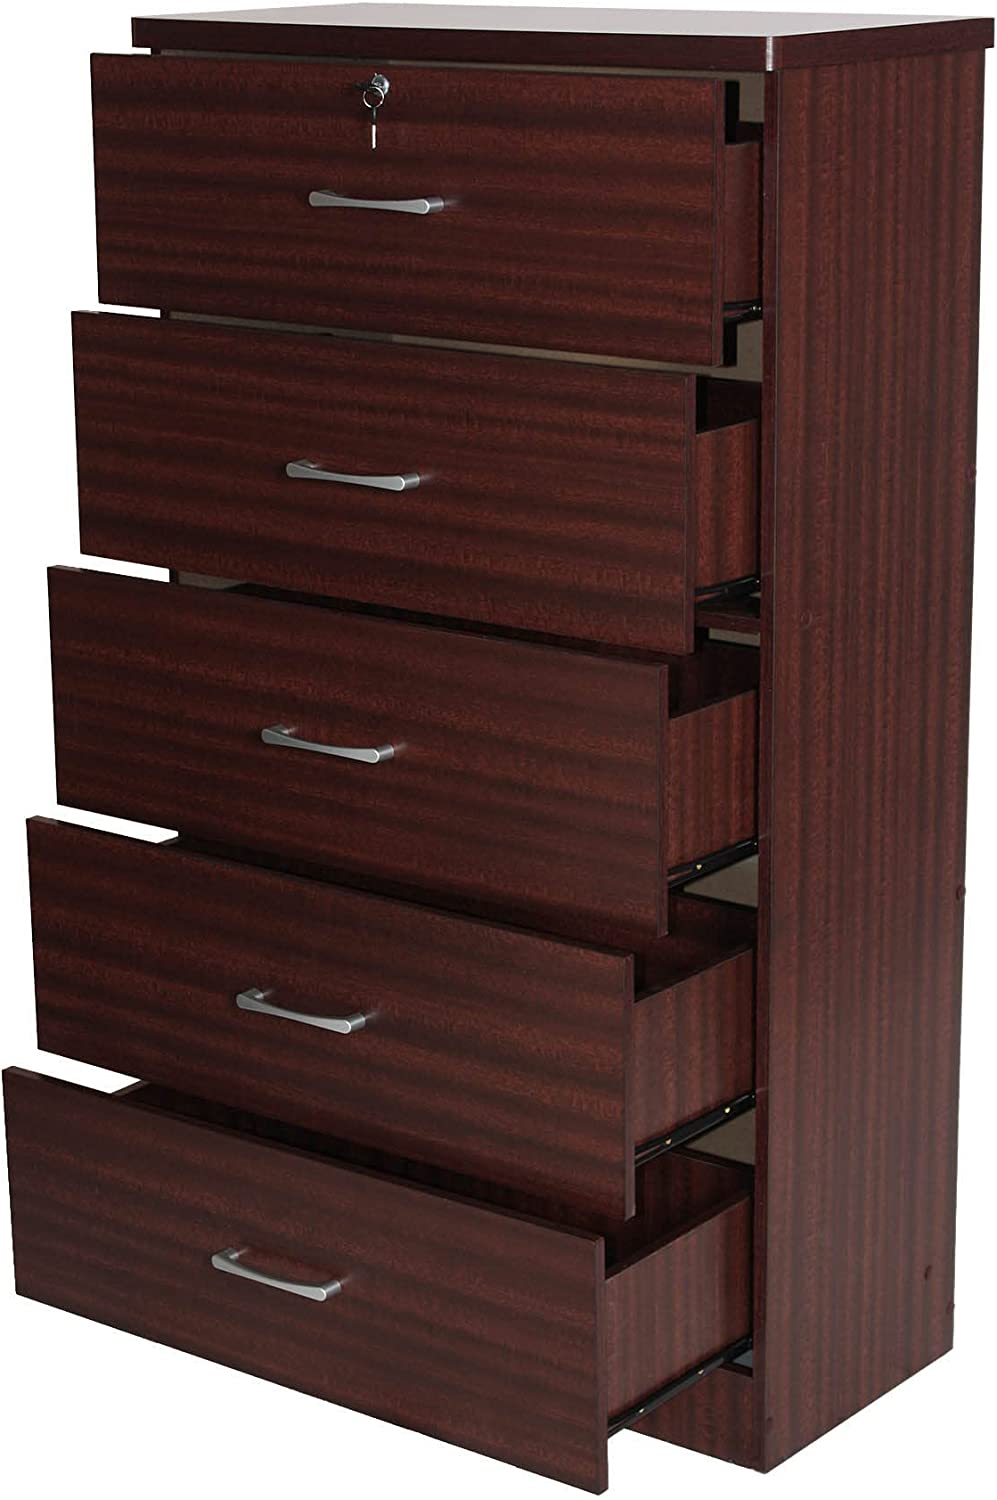 Better Home Products Olivia Super Jumbo 5 Drawer Chest with Metal Gliding Rails (SLD5 Tobacco)